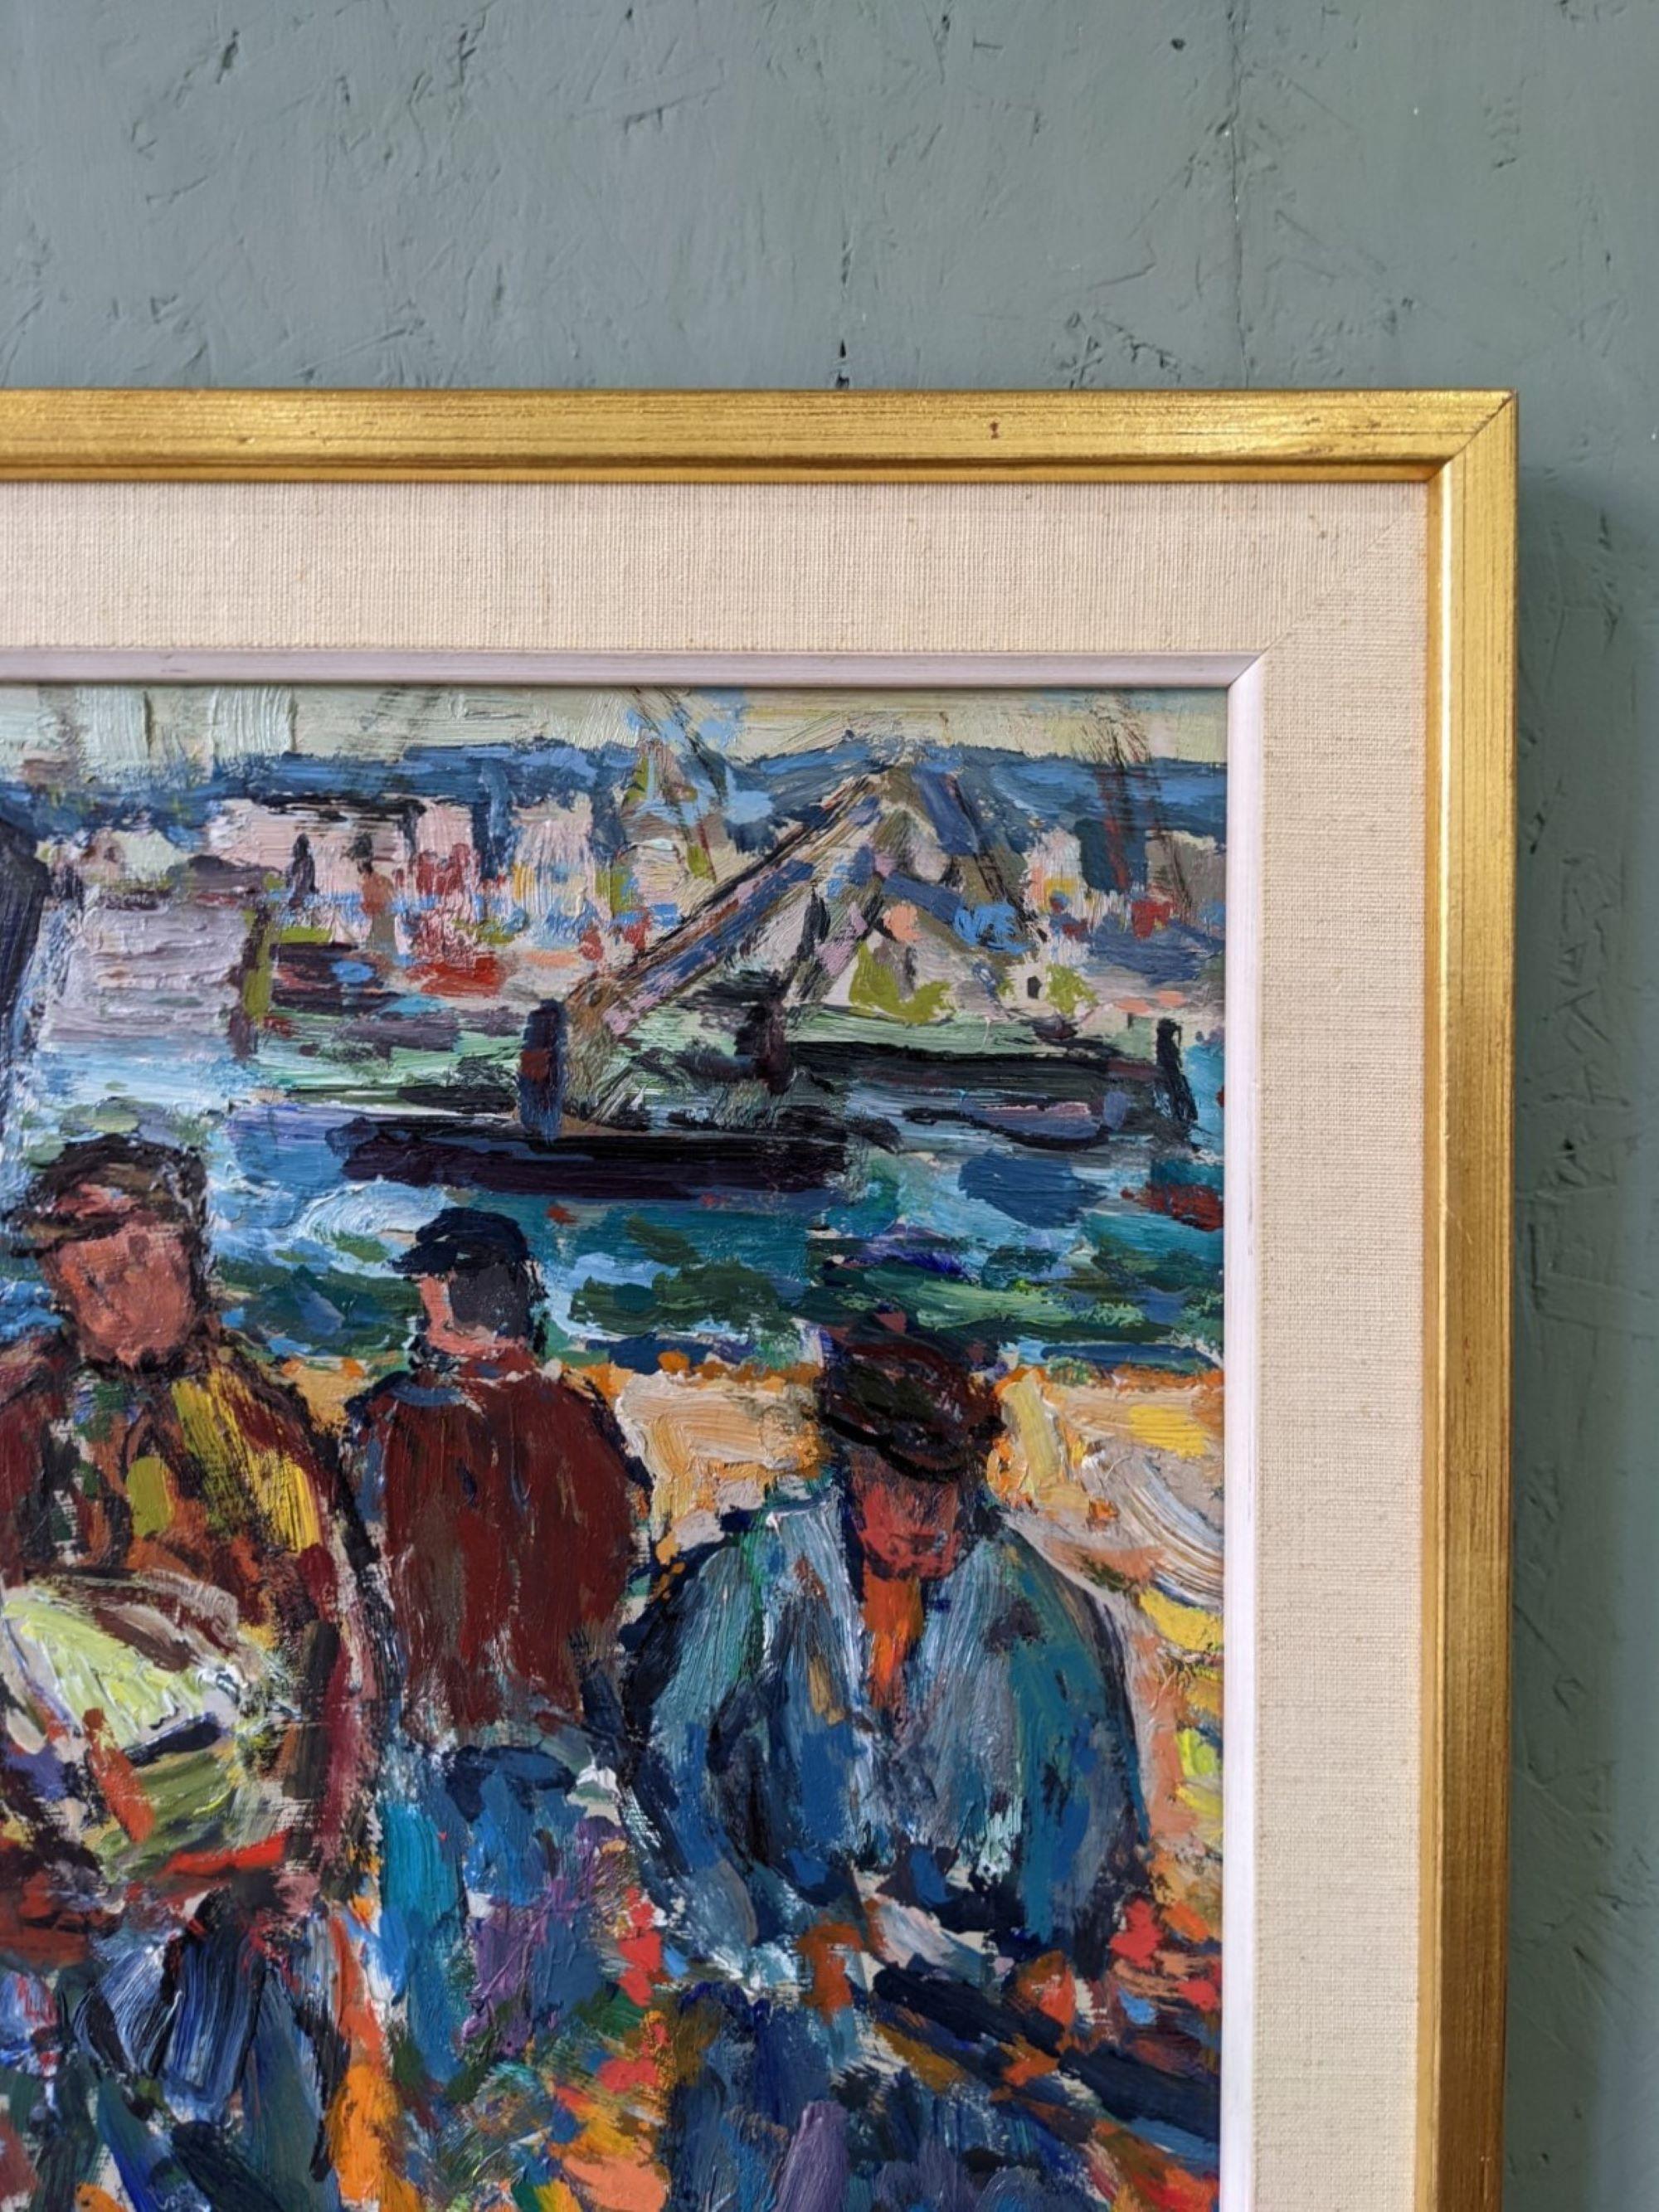 COASTAL DOCK
Size: 45 x 49.5 cm (including frame)
Oil on board

A vibrant and expressive mid-century figurative painting, executed in oil onto board.

The composition depicts a bustling coastal dock, with a stretch of boats resting in the water in